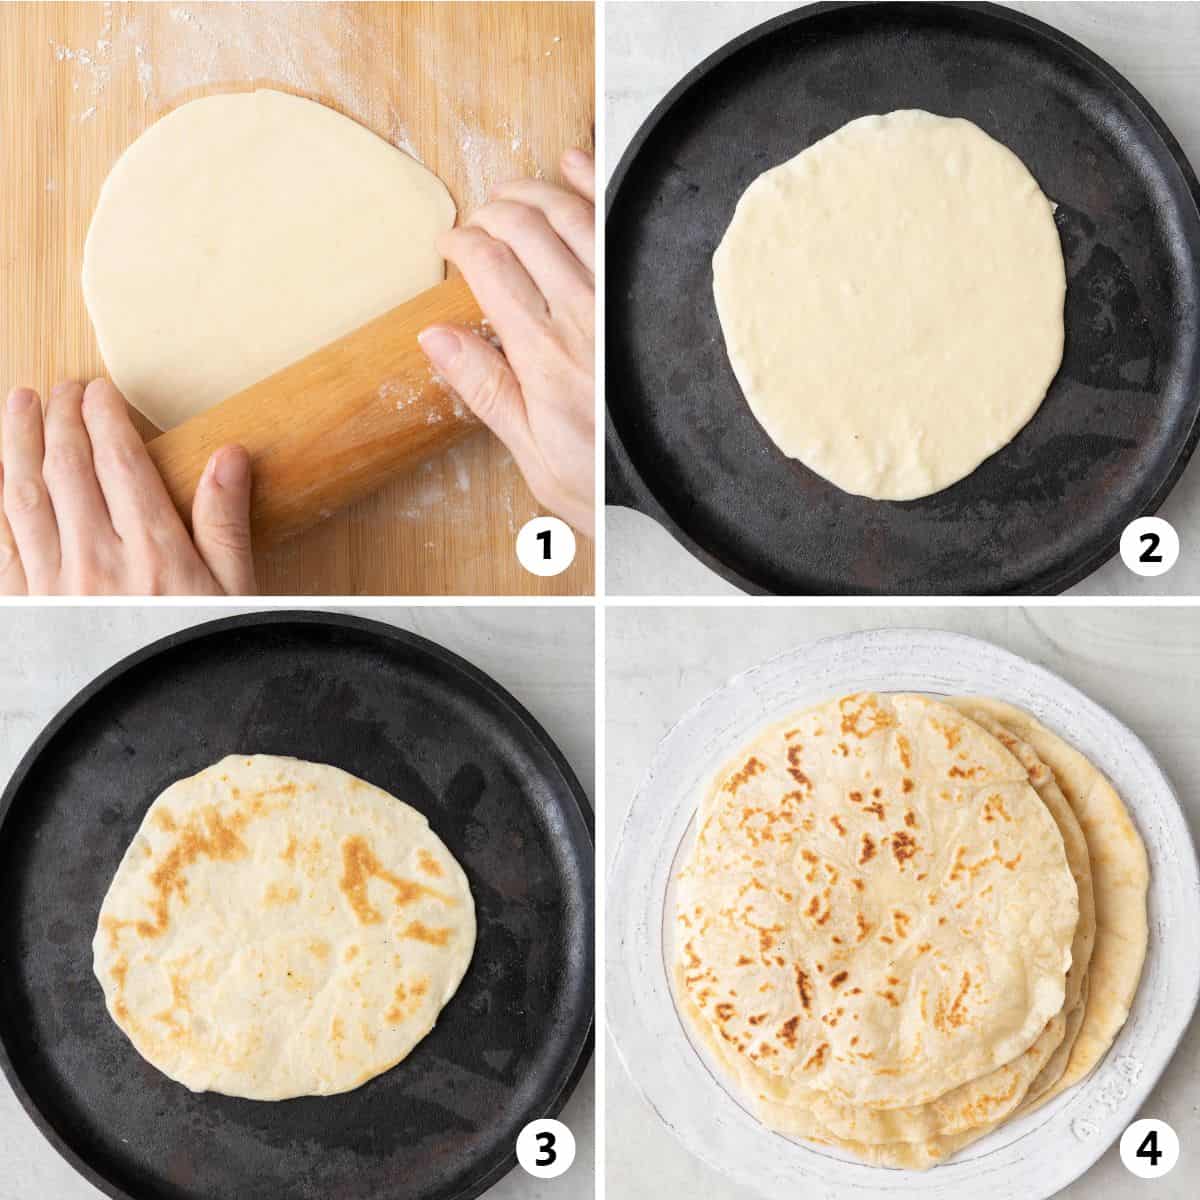 4 image collage making recipe: 1- flattening dough ball into a flat tortilla with a rolling pin, 2- flour shell in a skillet, 3- after flipping, 4- plate of cooked flour shells.